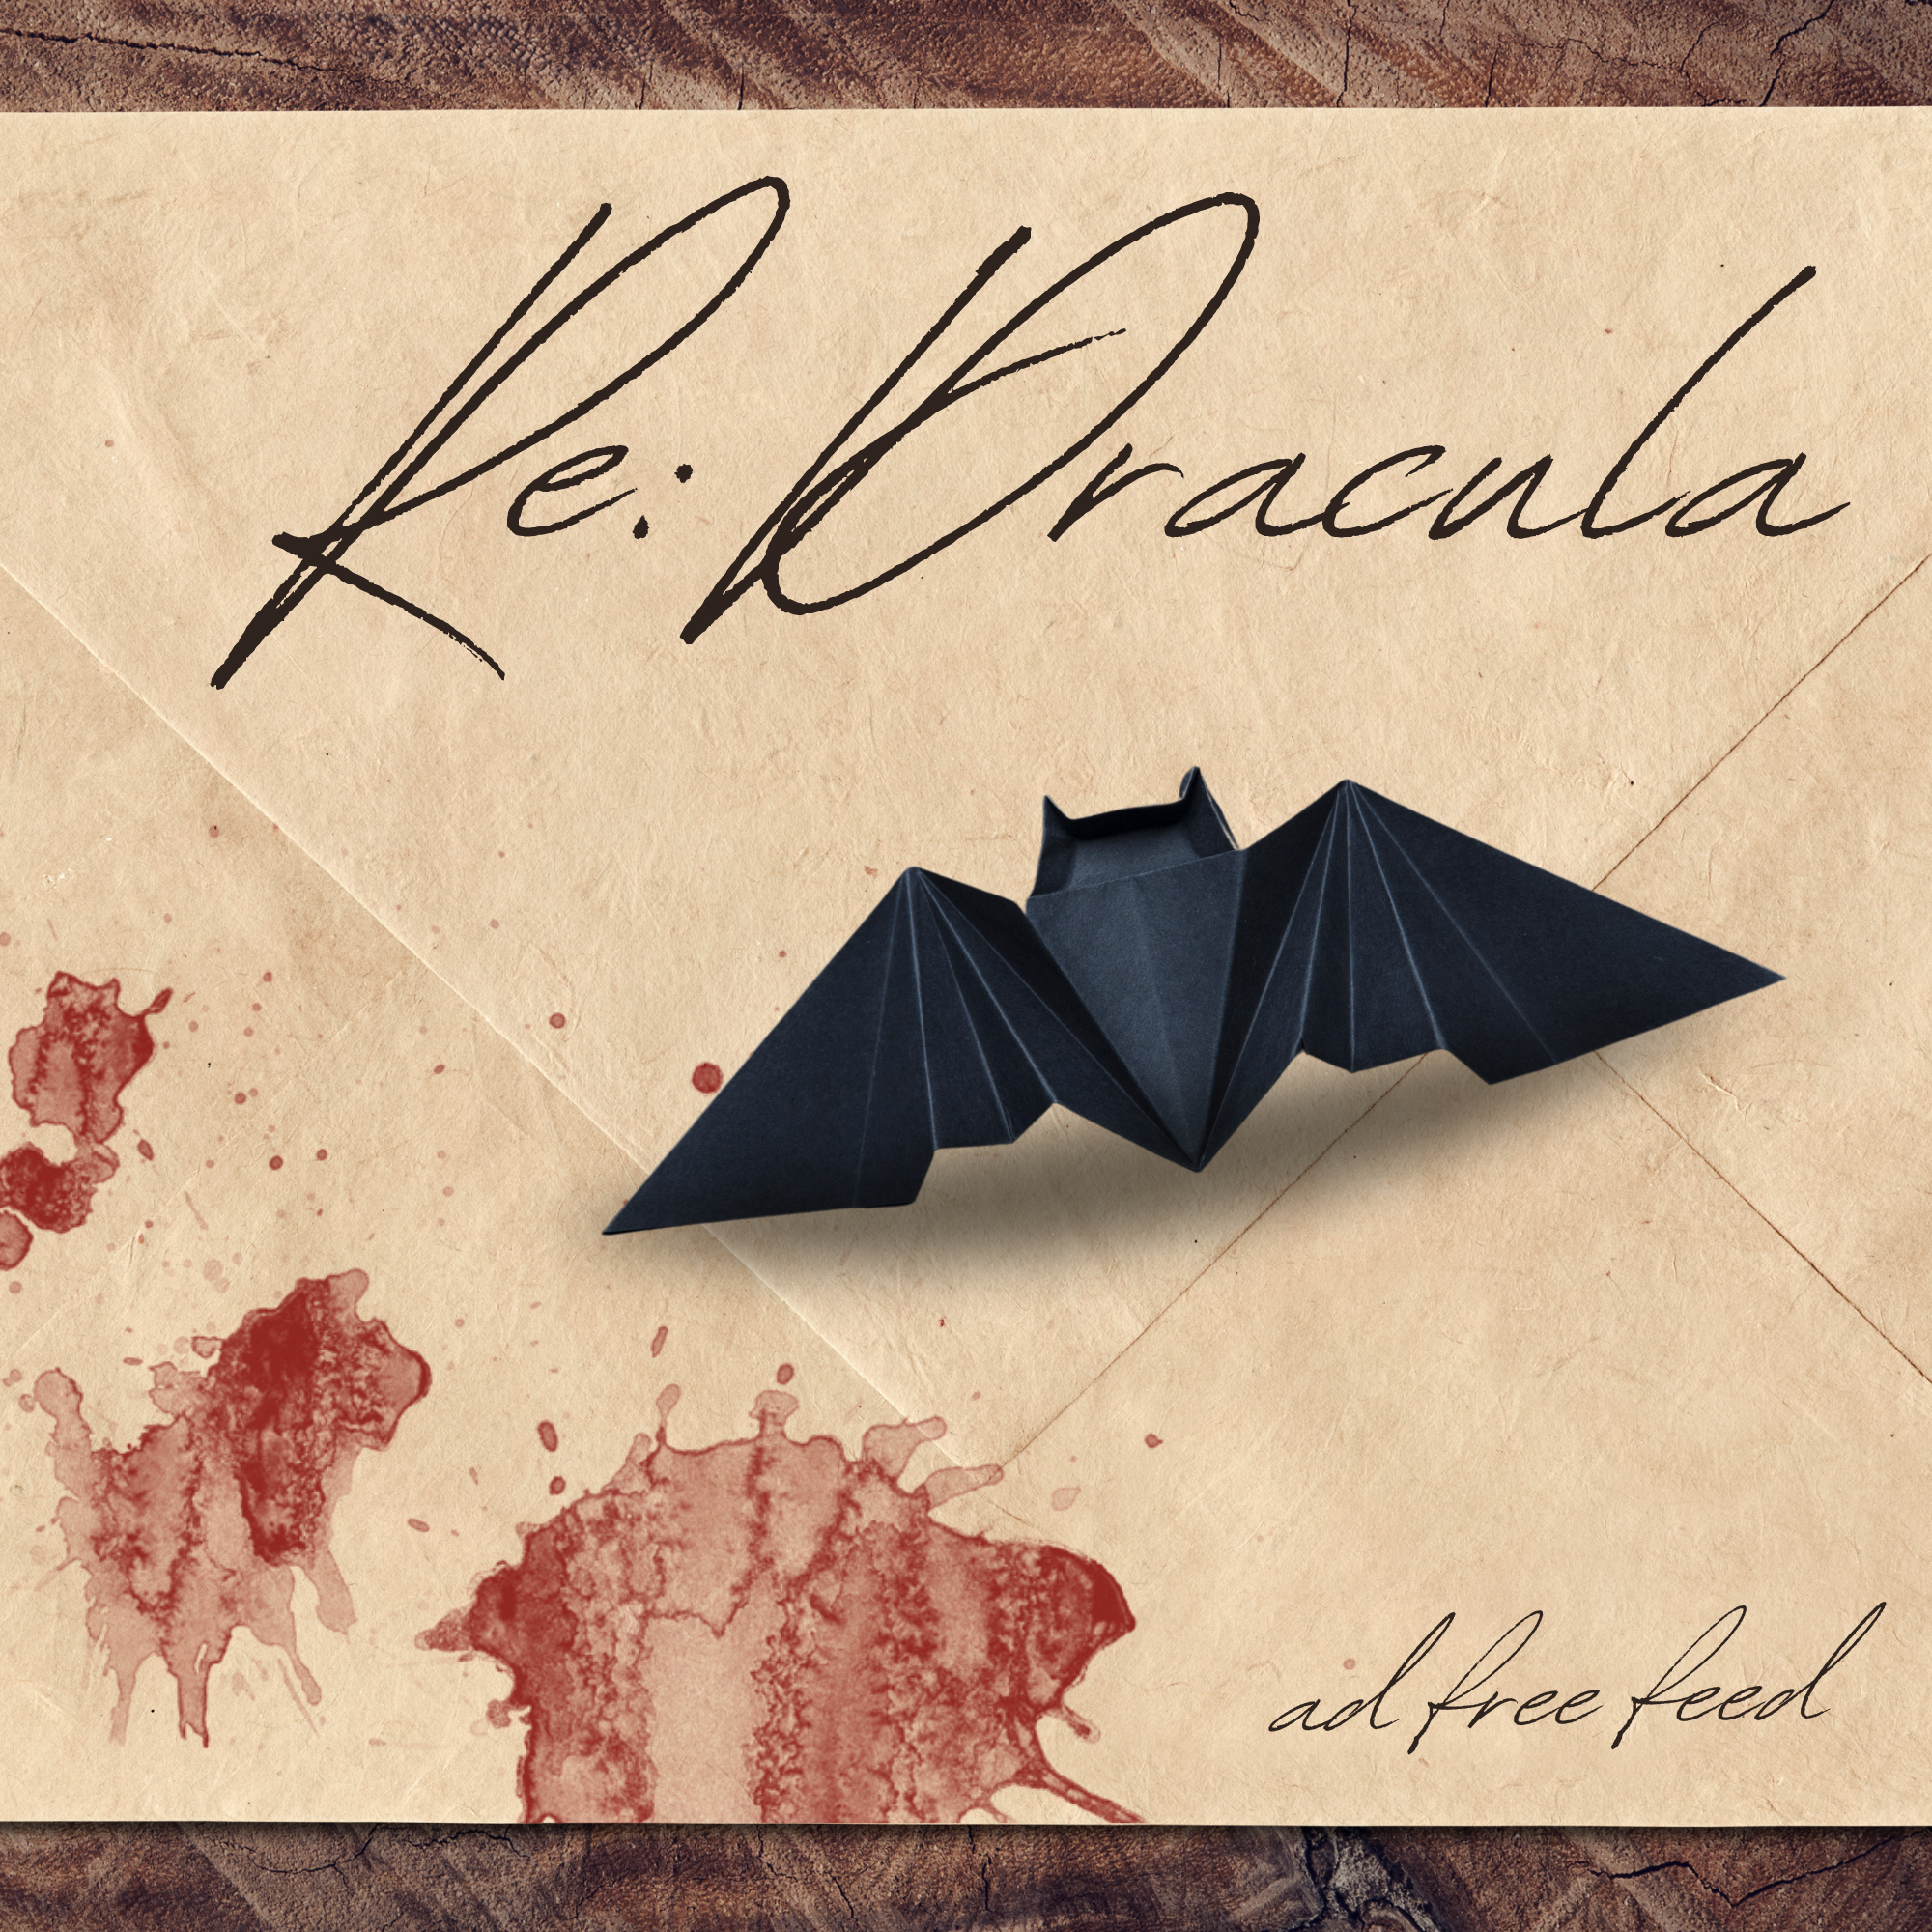 image for Re: Dracula